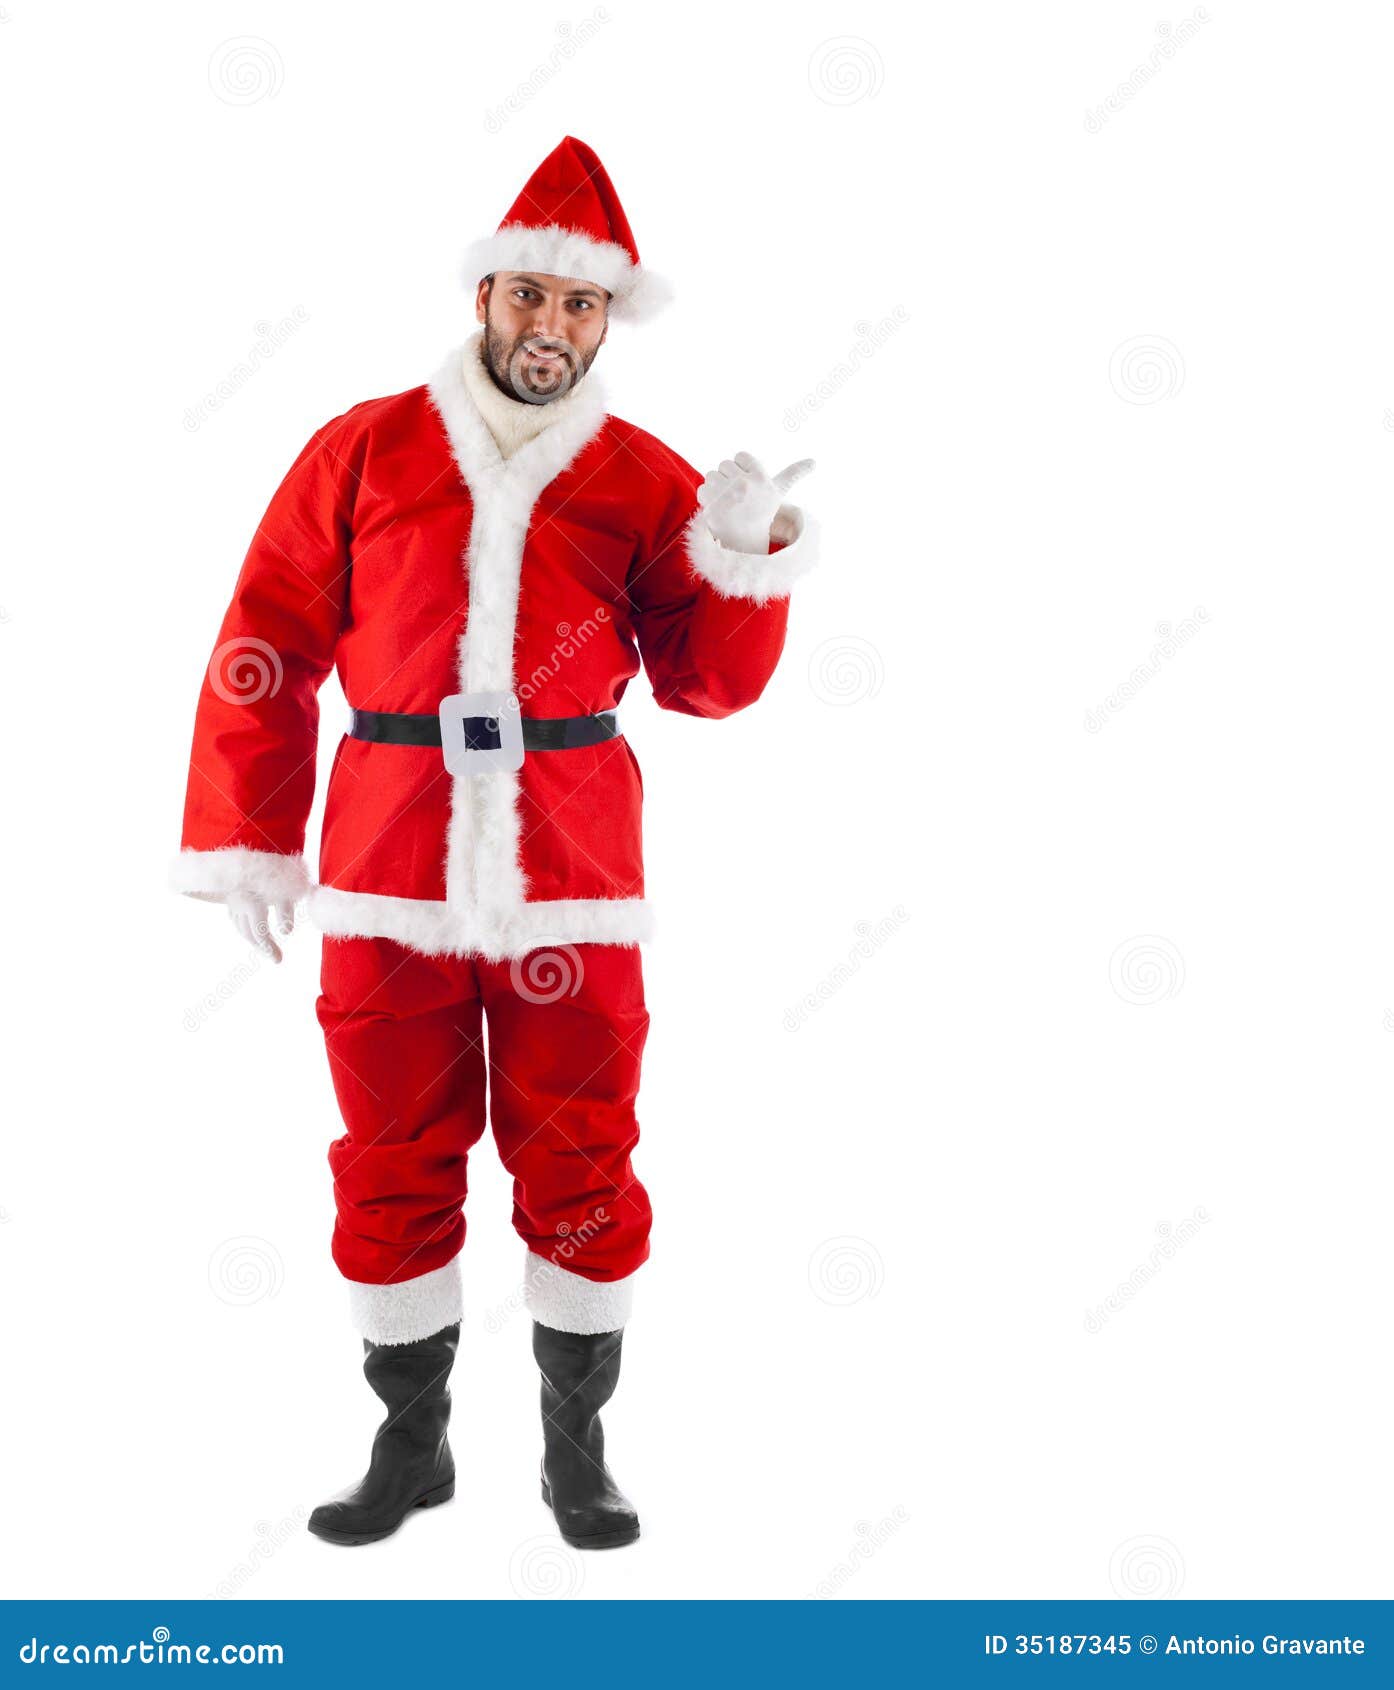 Santa Claus standing stock image. Image of father, gift - 35187345